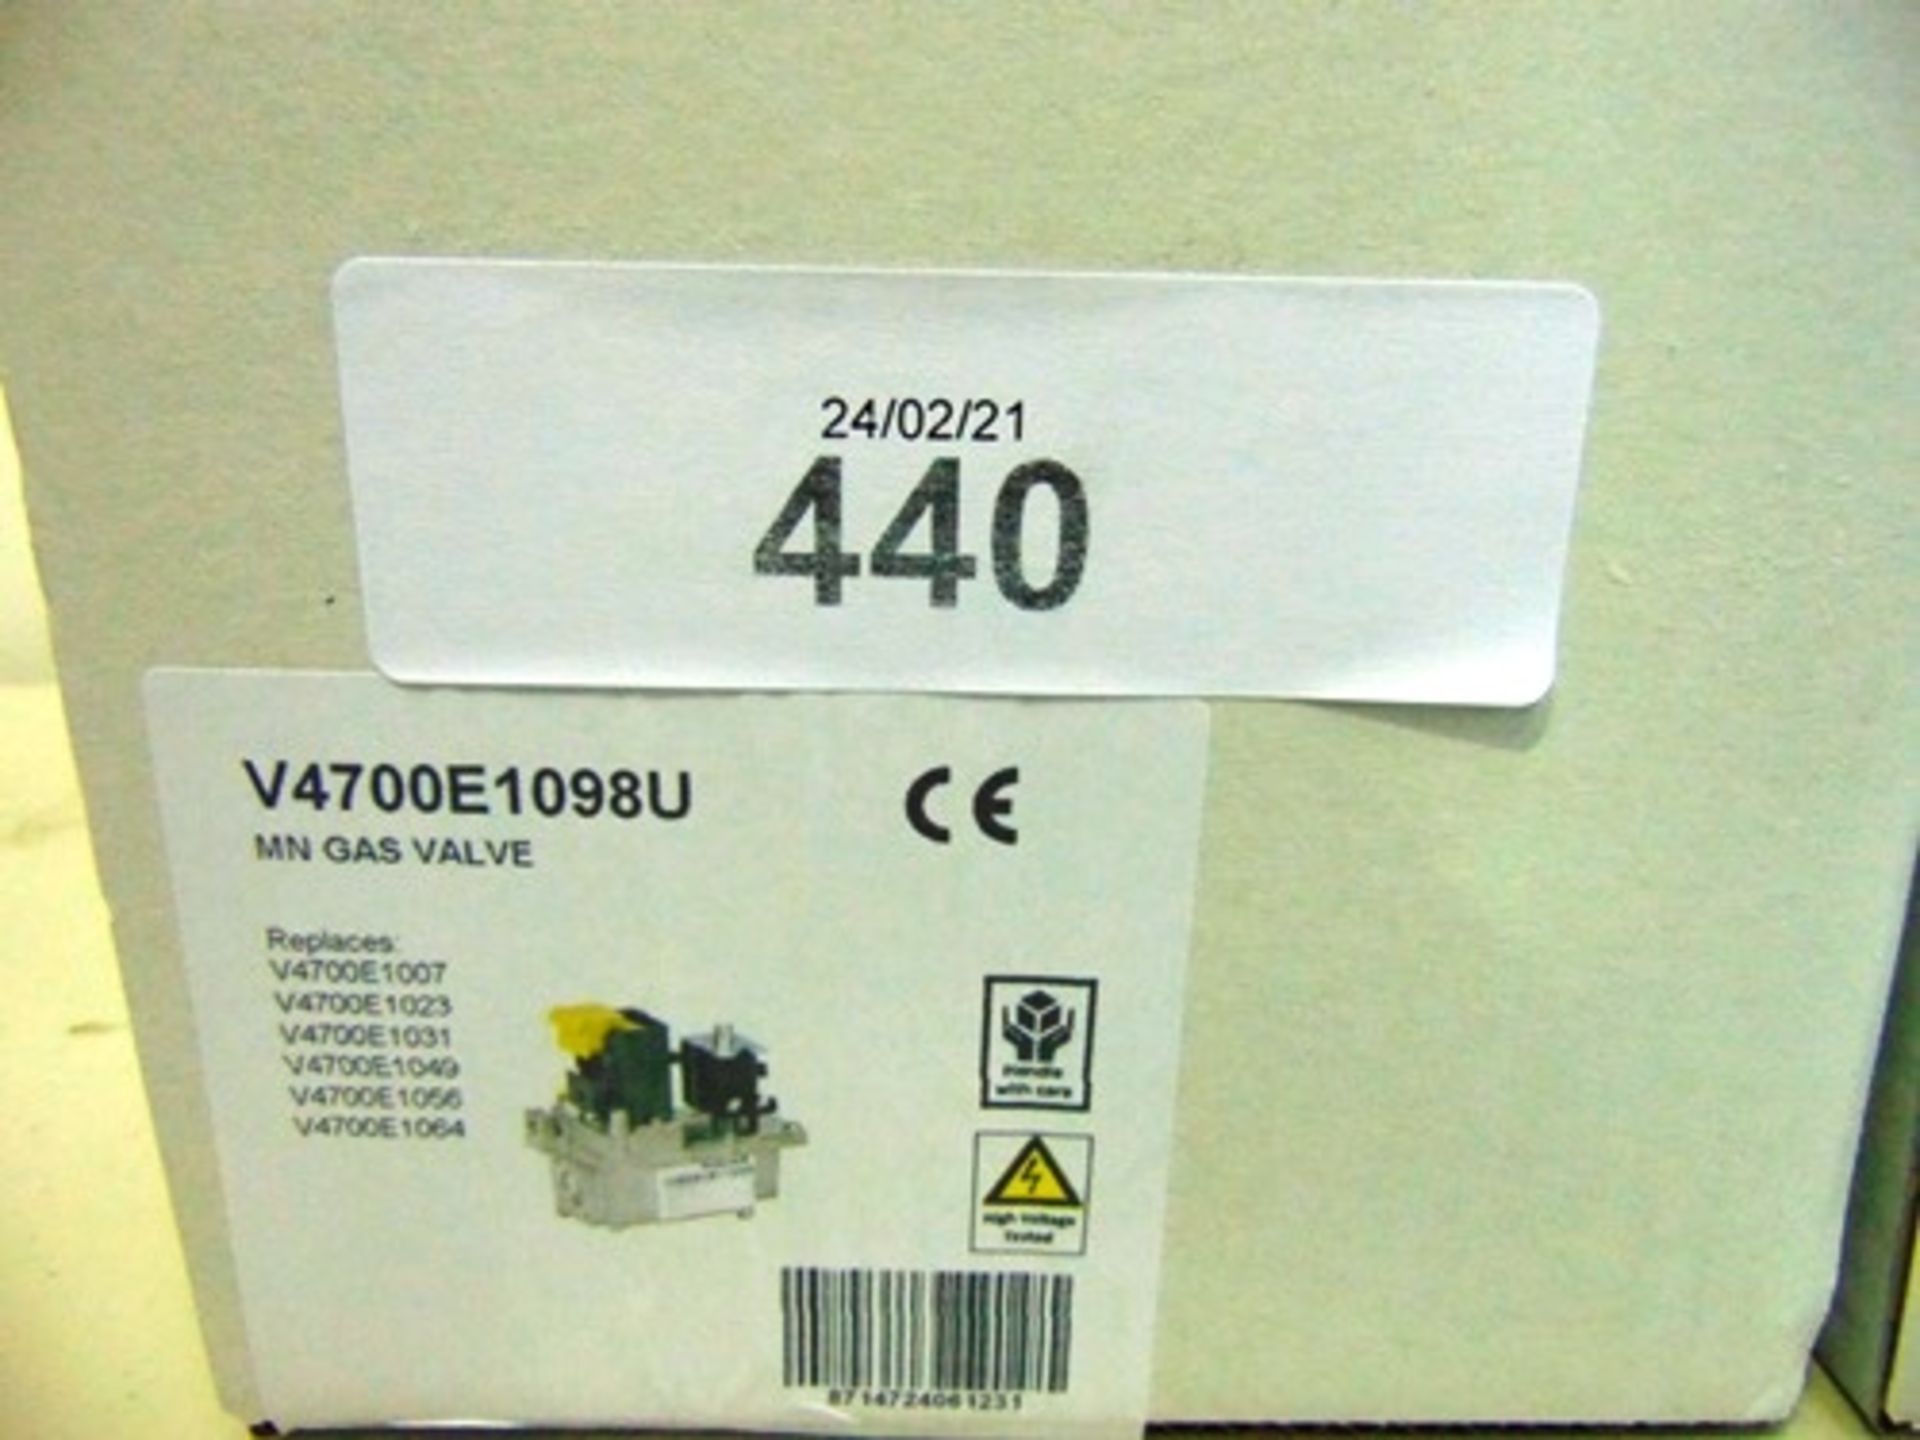 2 x Resideo MN gas valve, model V4700E1098U - Sealed new in box (GS21) - Image 2 of 2